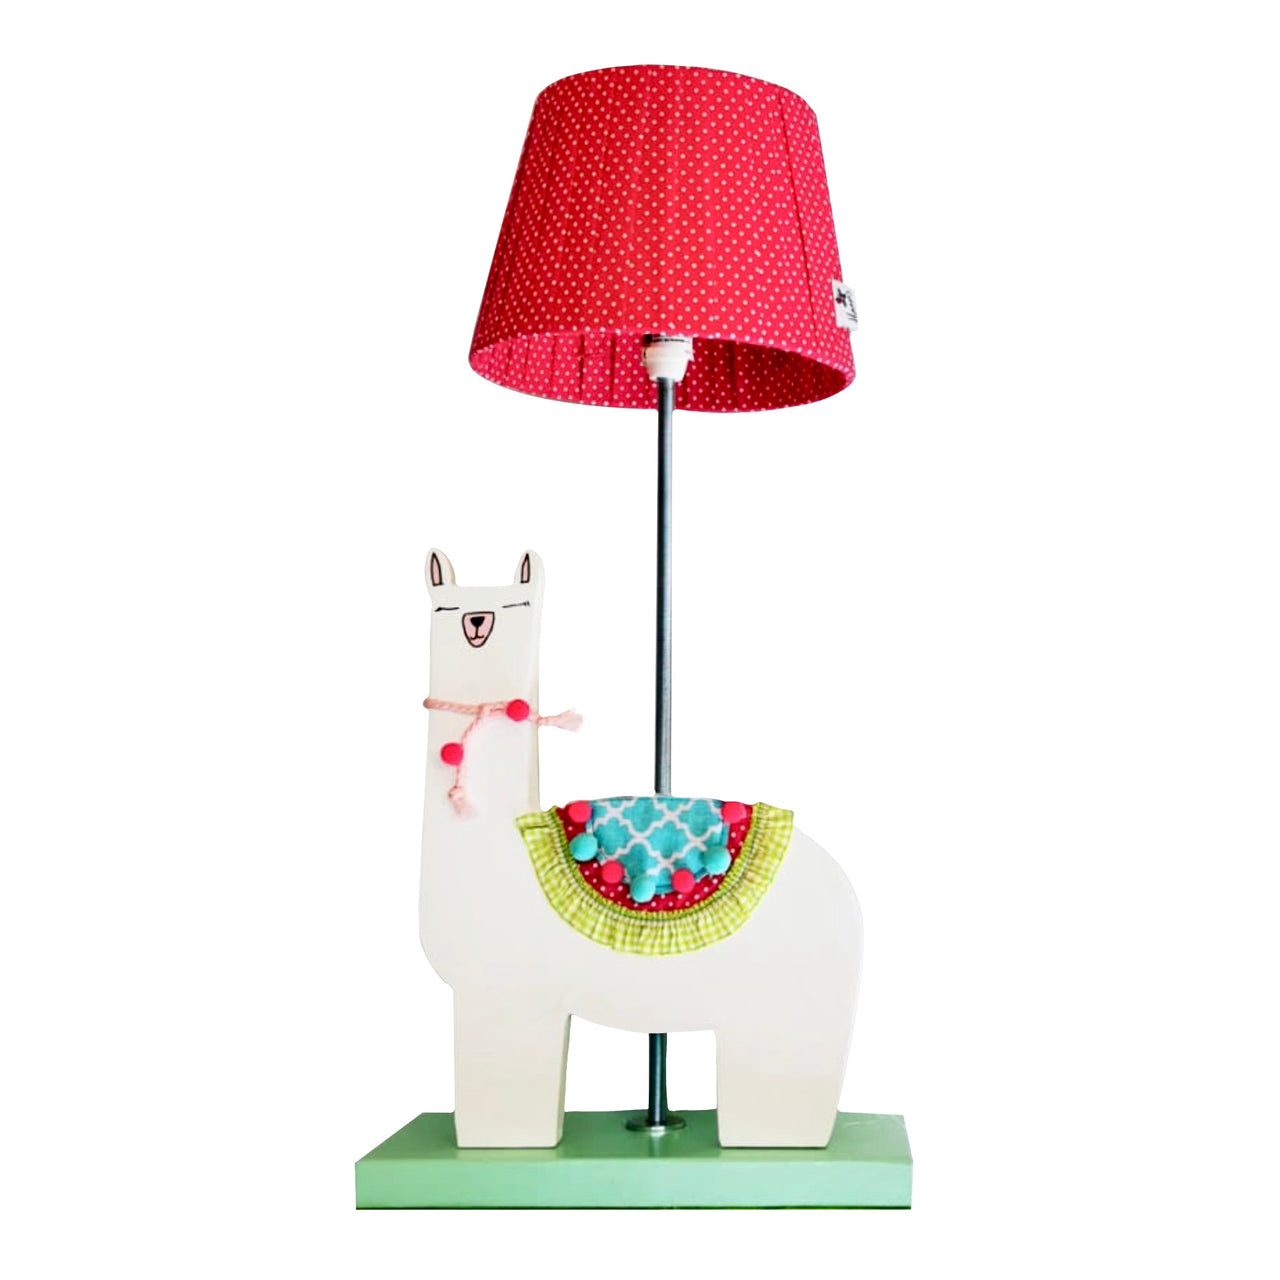 Designed and hand-crafted in Italy, this unique side lamp with a wooden base and a llama design is perfect for your little rascal's bedroom.  Creatively constructed from wood and fabric, the white llama with colourful embellishments on a mint base is simply beautiful. The dark pink lampshade with white spots is handmade and compliments the rest of the lamp. 